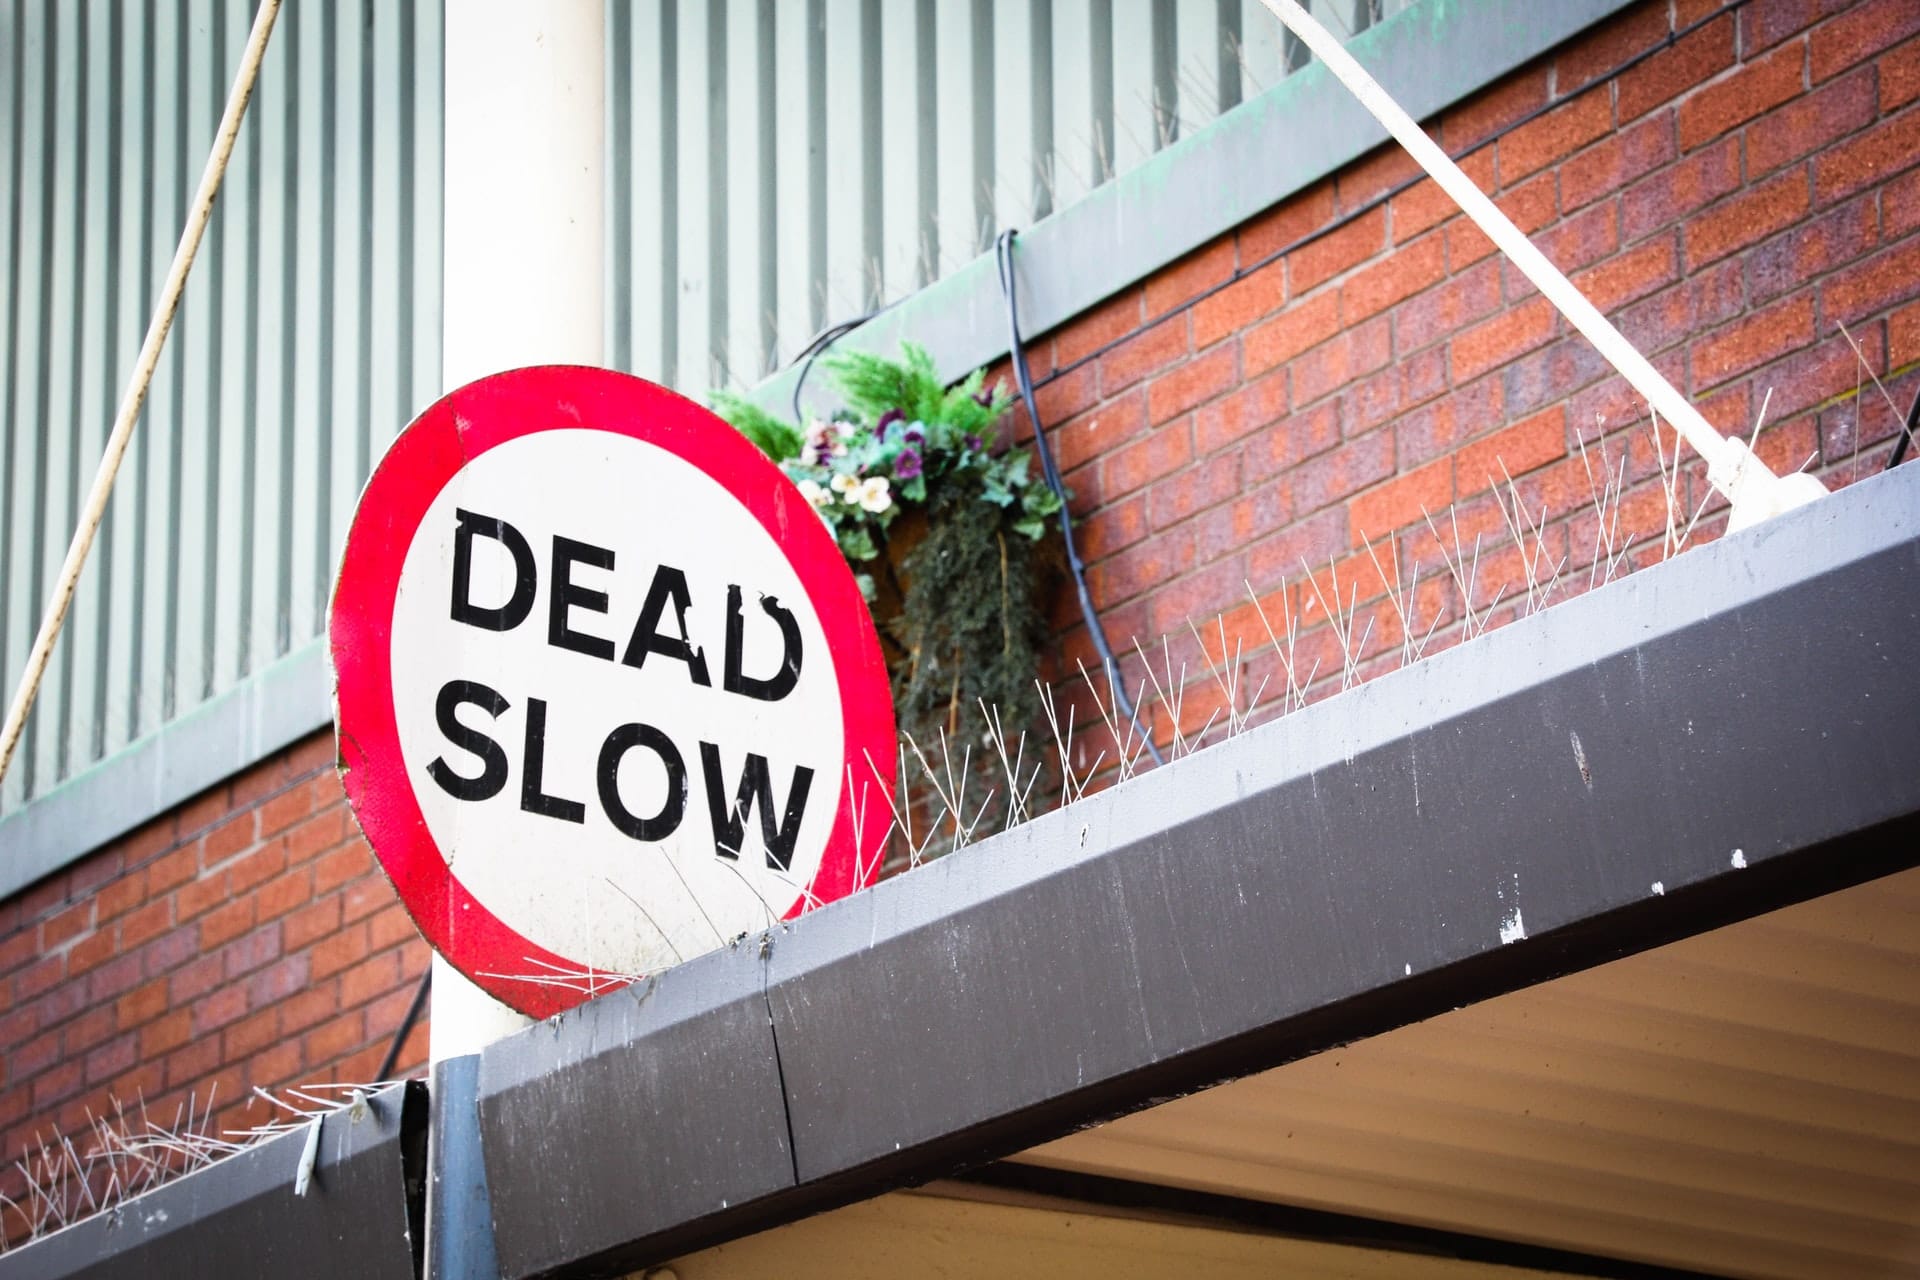 A traffic sign reading "DEAD SLOW